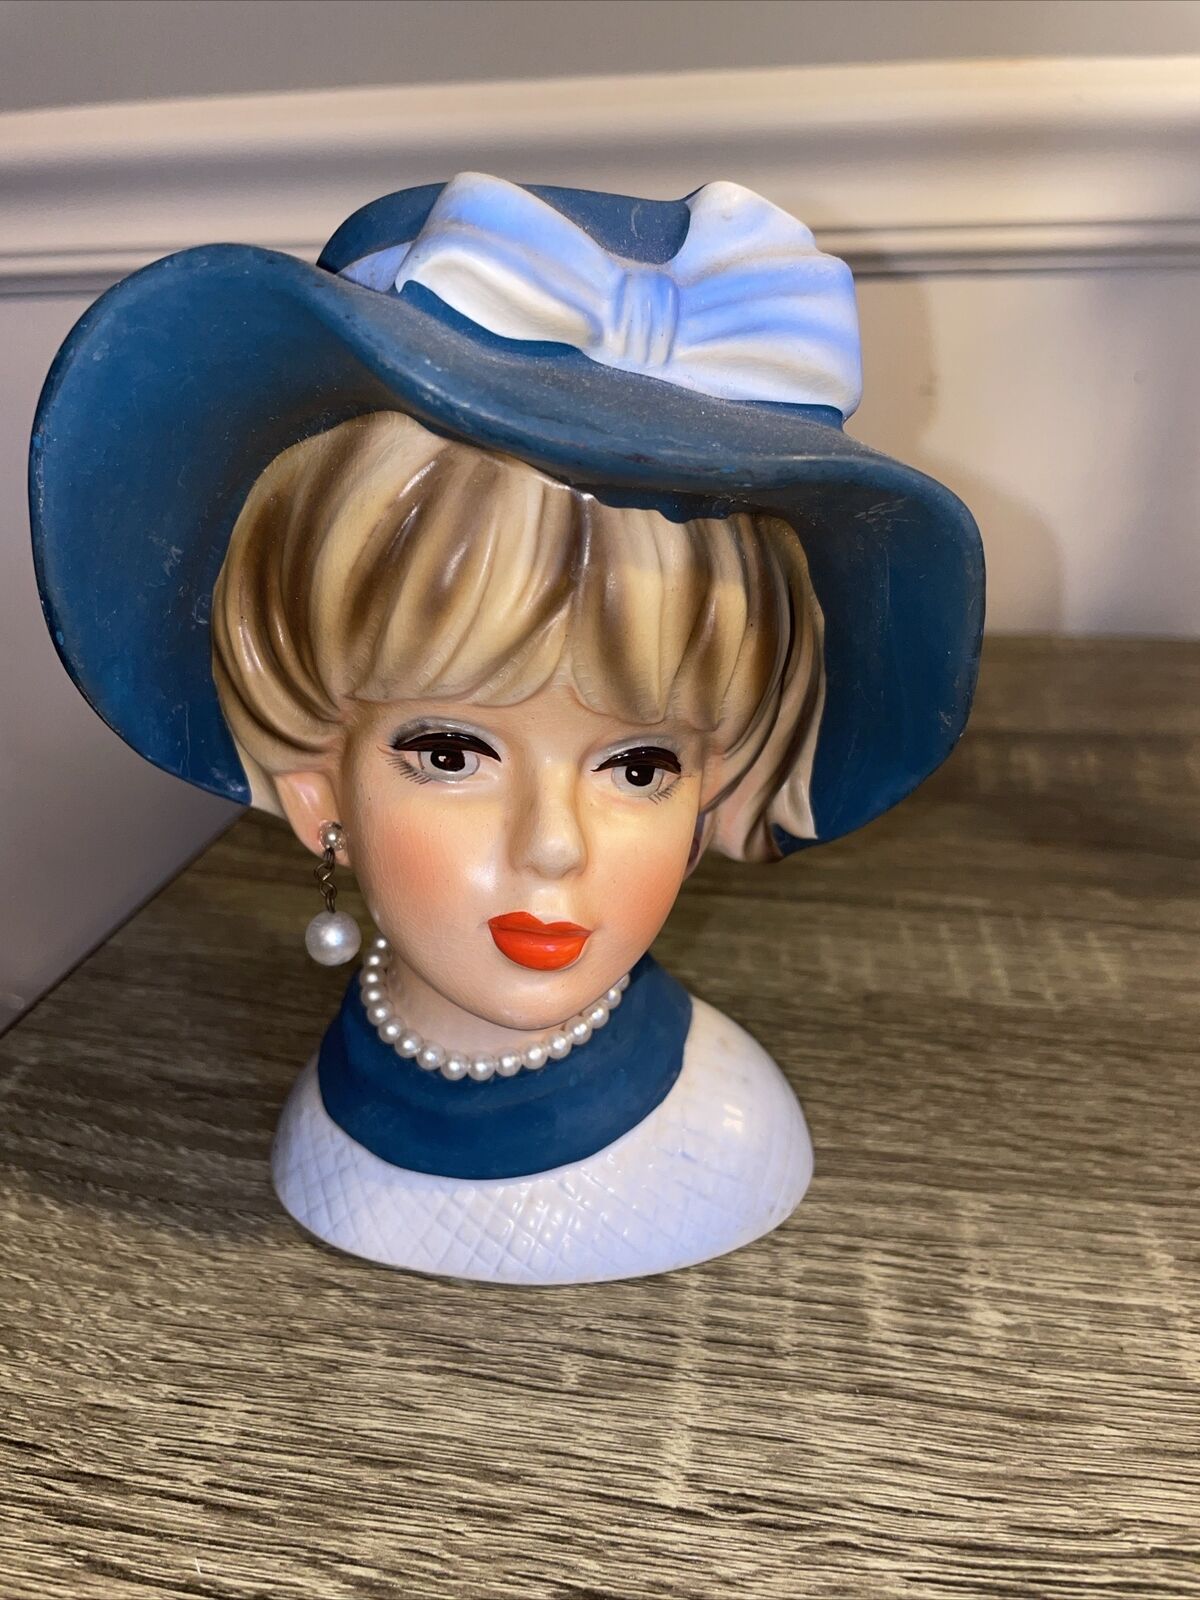 Vintage NAPCOWARE C7494 LADY HEAD VASE PLANTER BLUE WITH PEARLS WOMAN BUST